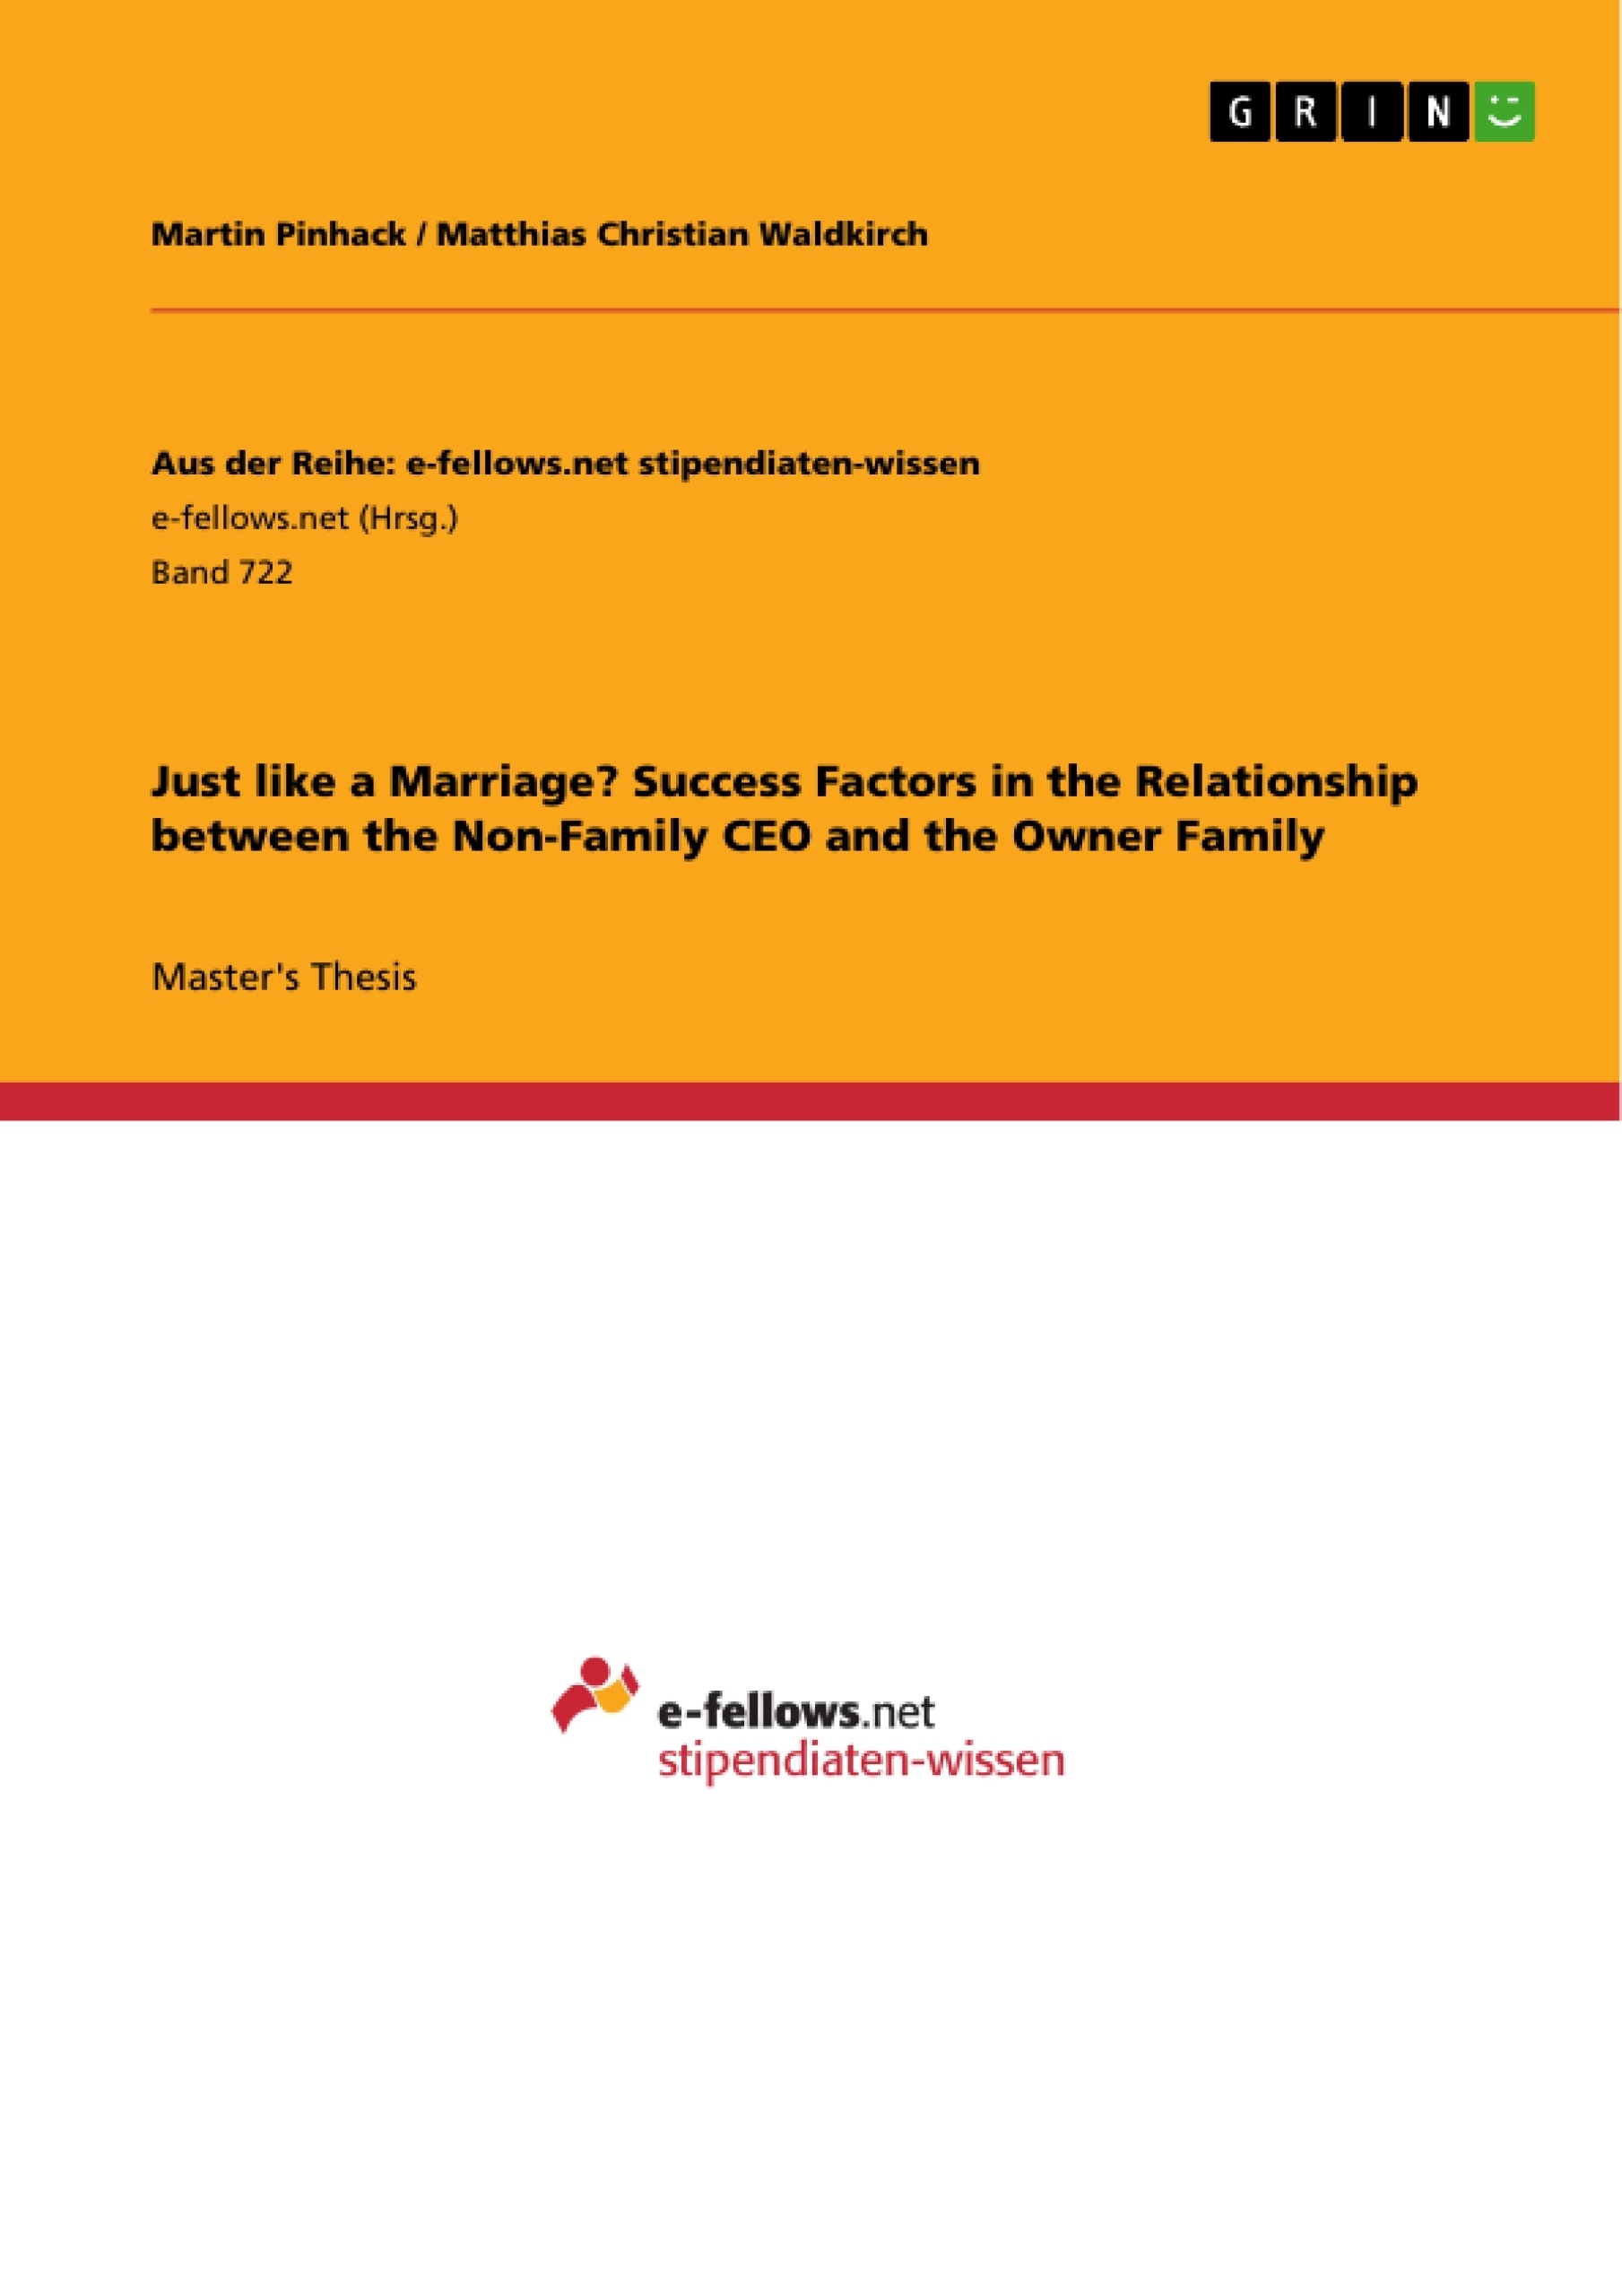 Titel: Just like a Marriage? Success Factors in the Relationship between the Non-Family CEO and the Owner Family